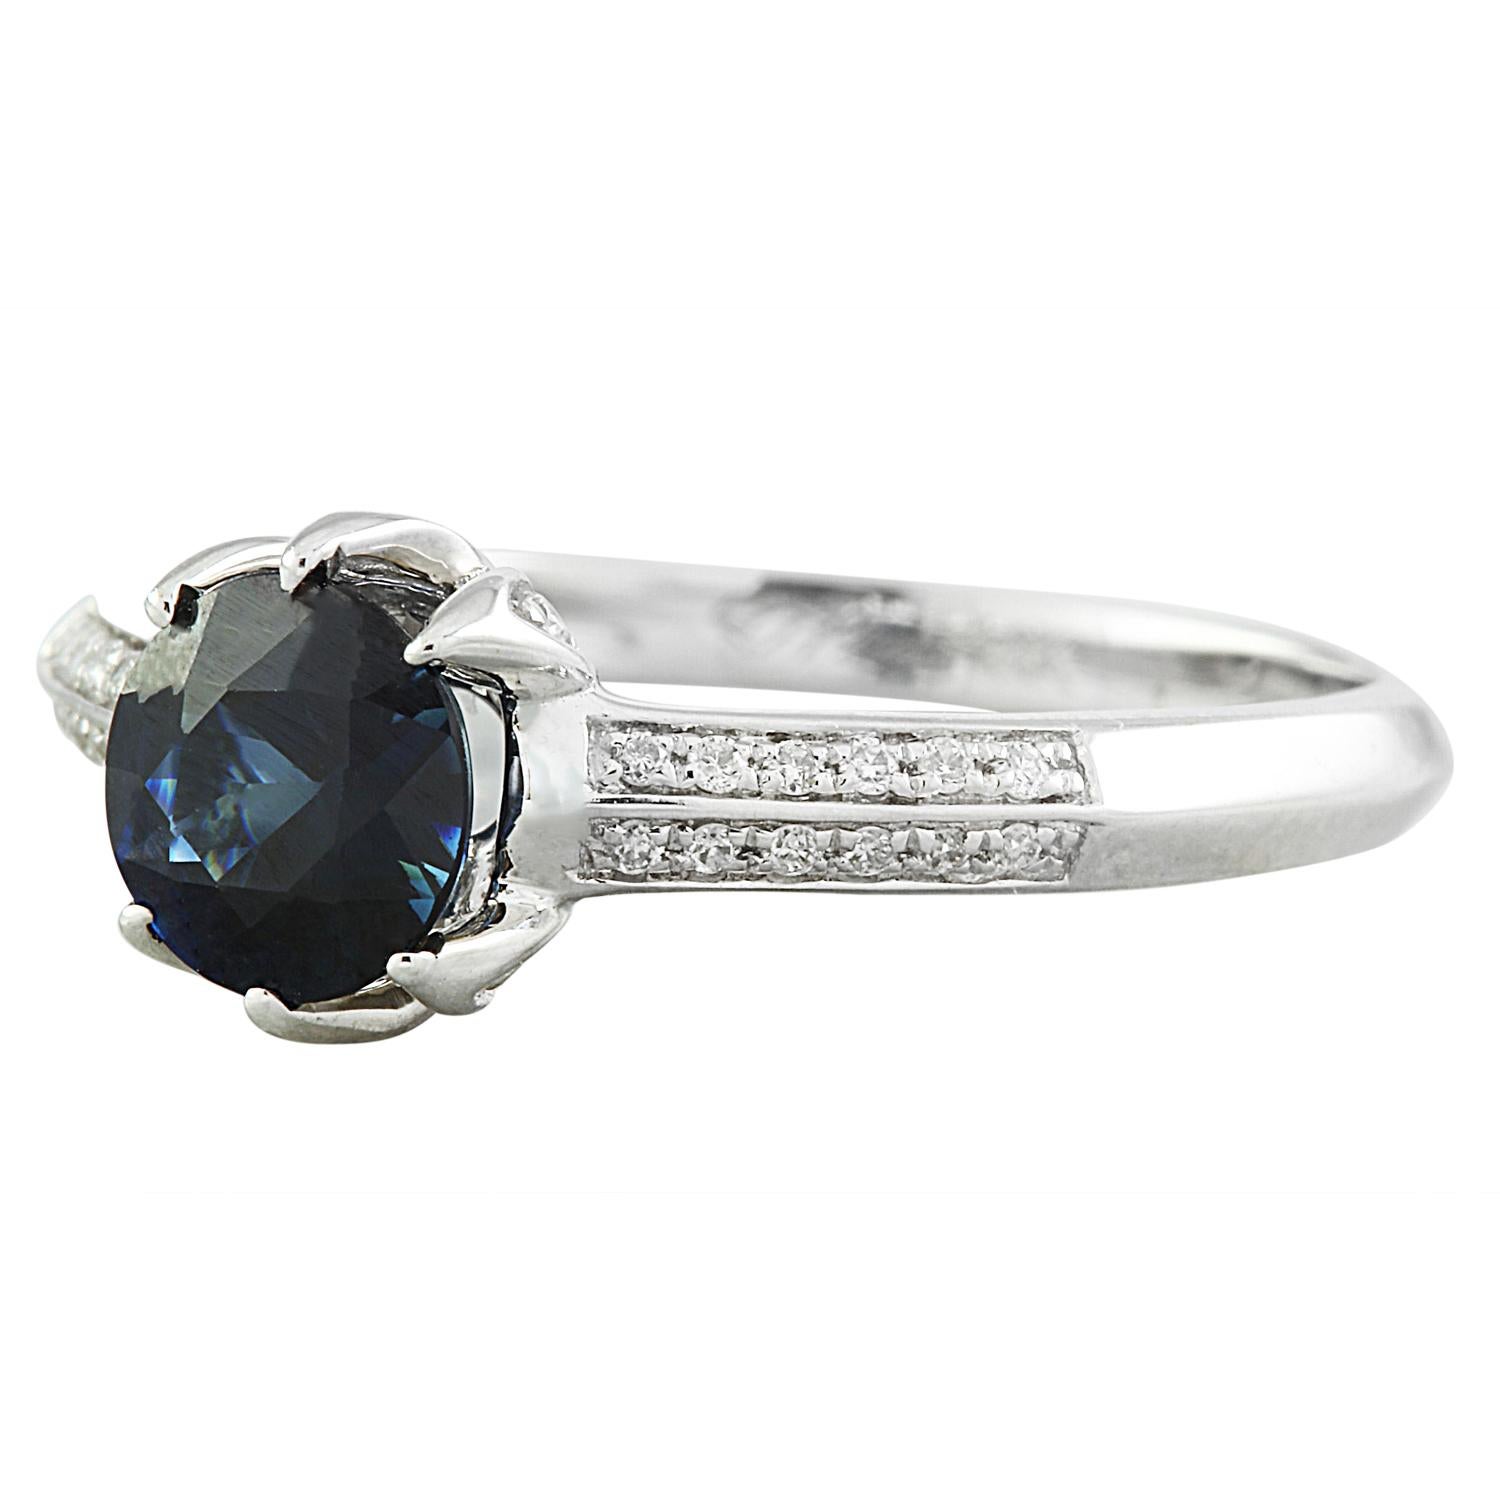 Introducing our exquisite 1.19 Carat Natural Sapphire 14K Solid White Gold Diamond Ring, a timeless symbol of beauty and grace.

This stunning ring is crafted with precision and stamped with 14K authenticity, boasting a total weight of 2.4 grams.